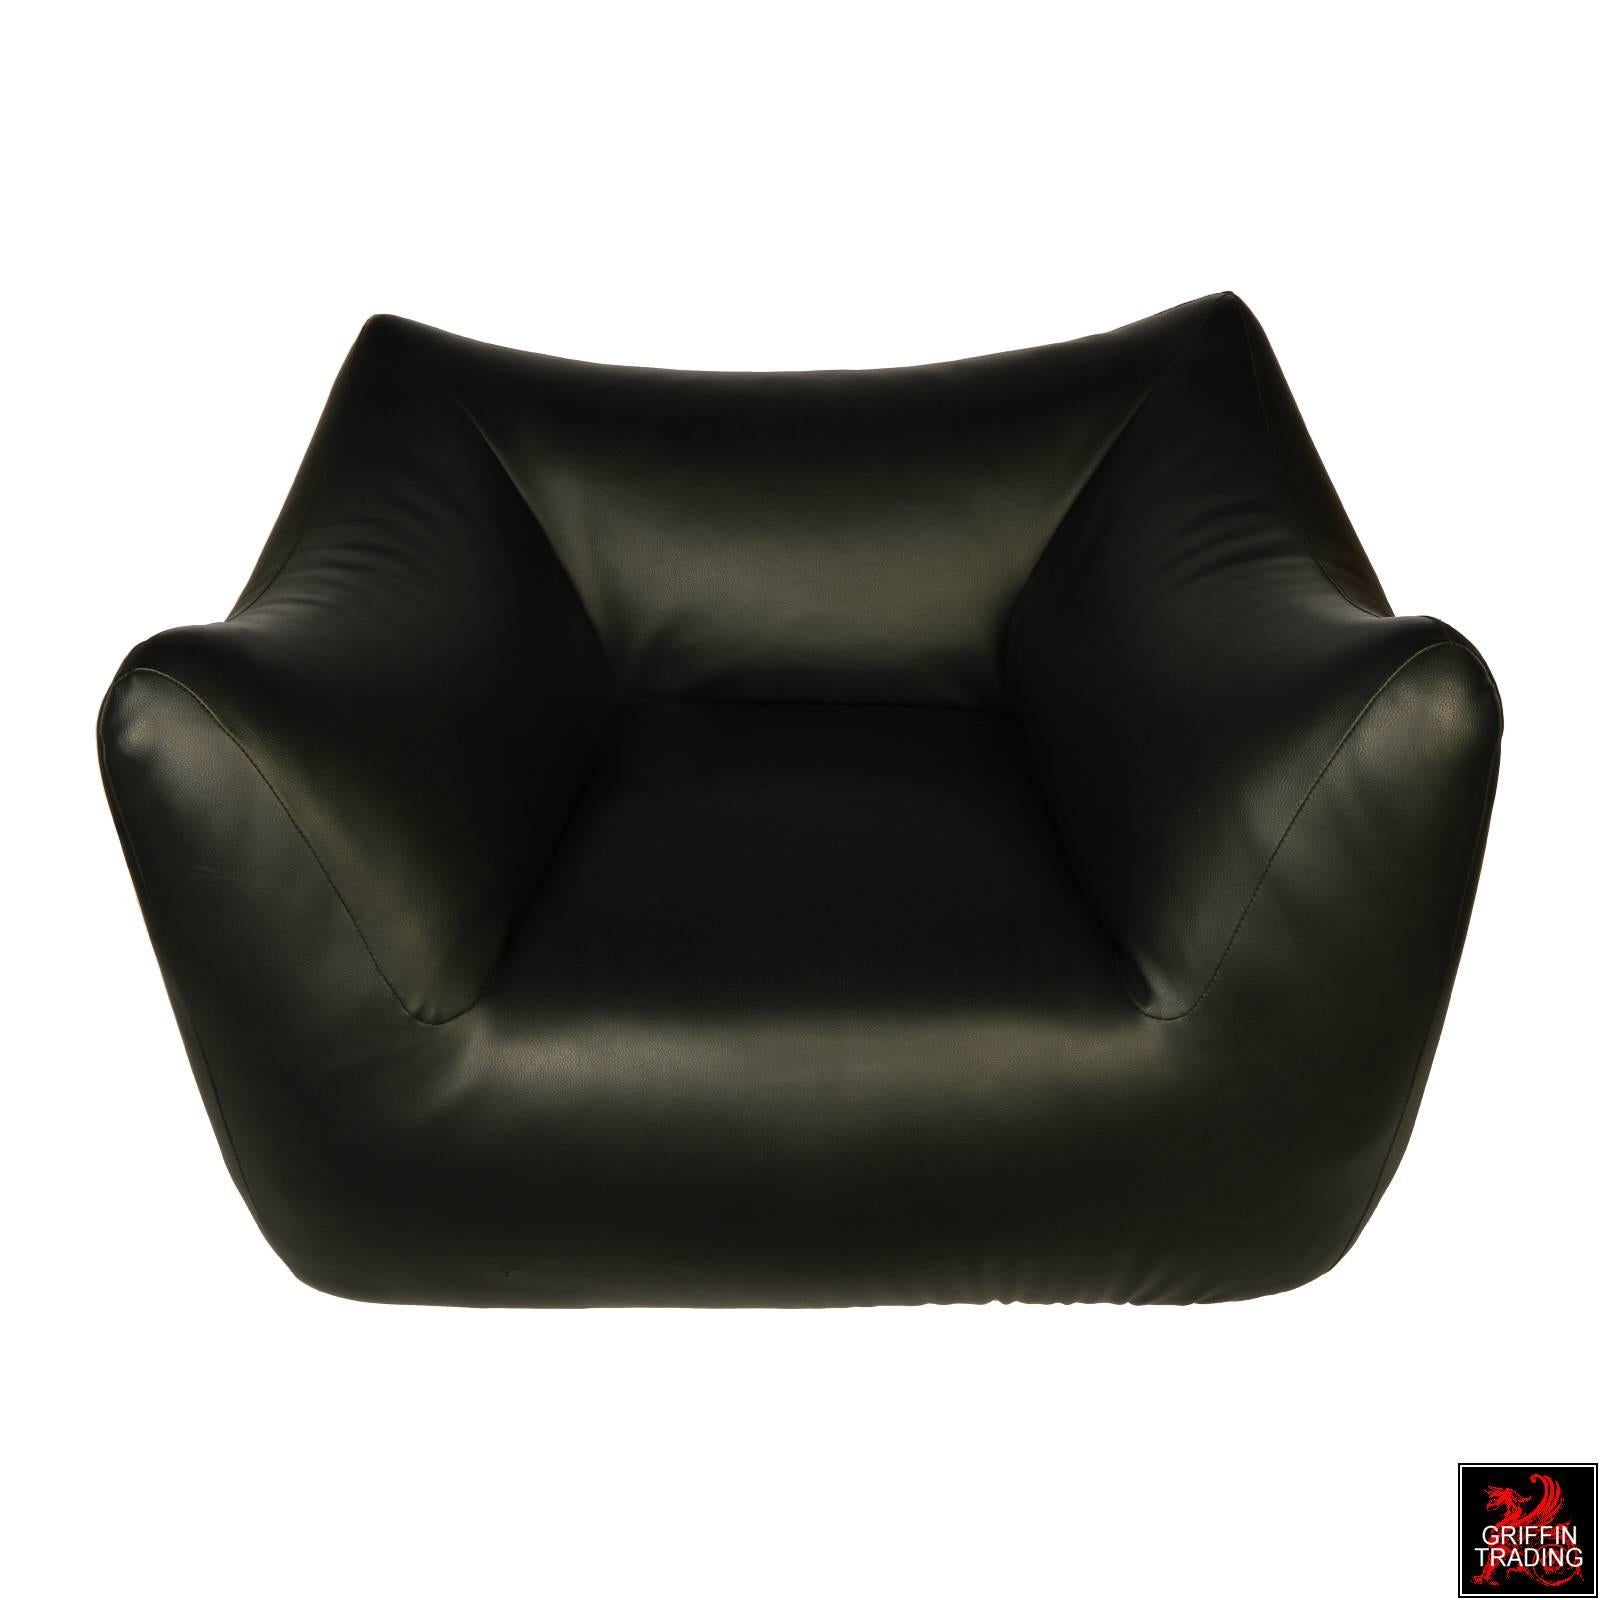 This overstuffed pillow shaped lounge chair is called Le Bambole and was designed by Italian architect Mario Bellini. Its pliable form embraces you and is comfortable and enjoyable to sit in. The design and appearance puts this armchair a in a class